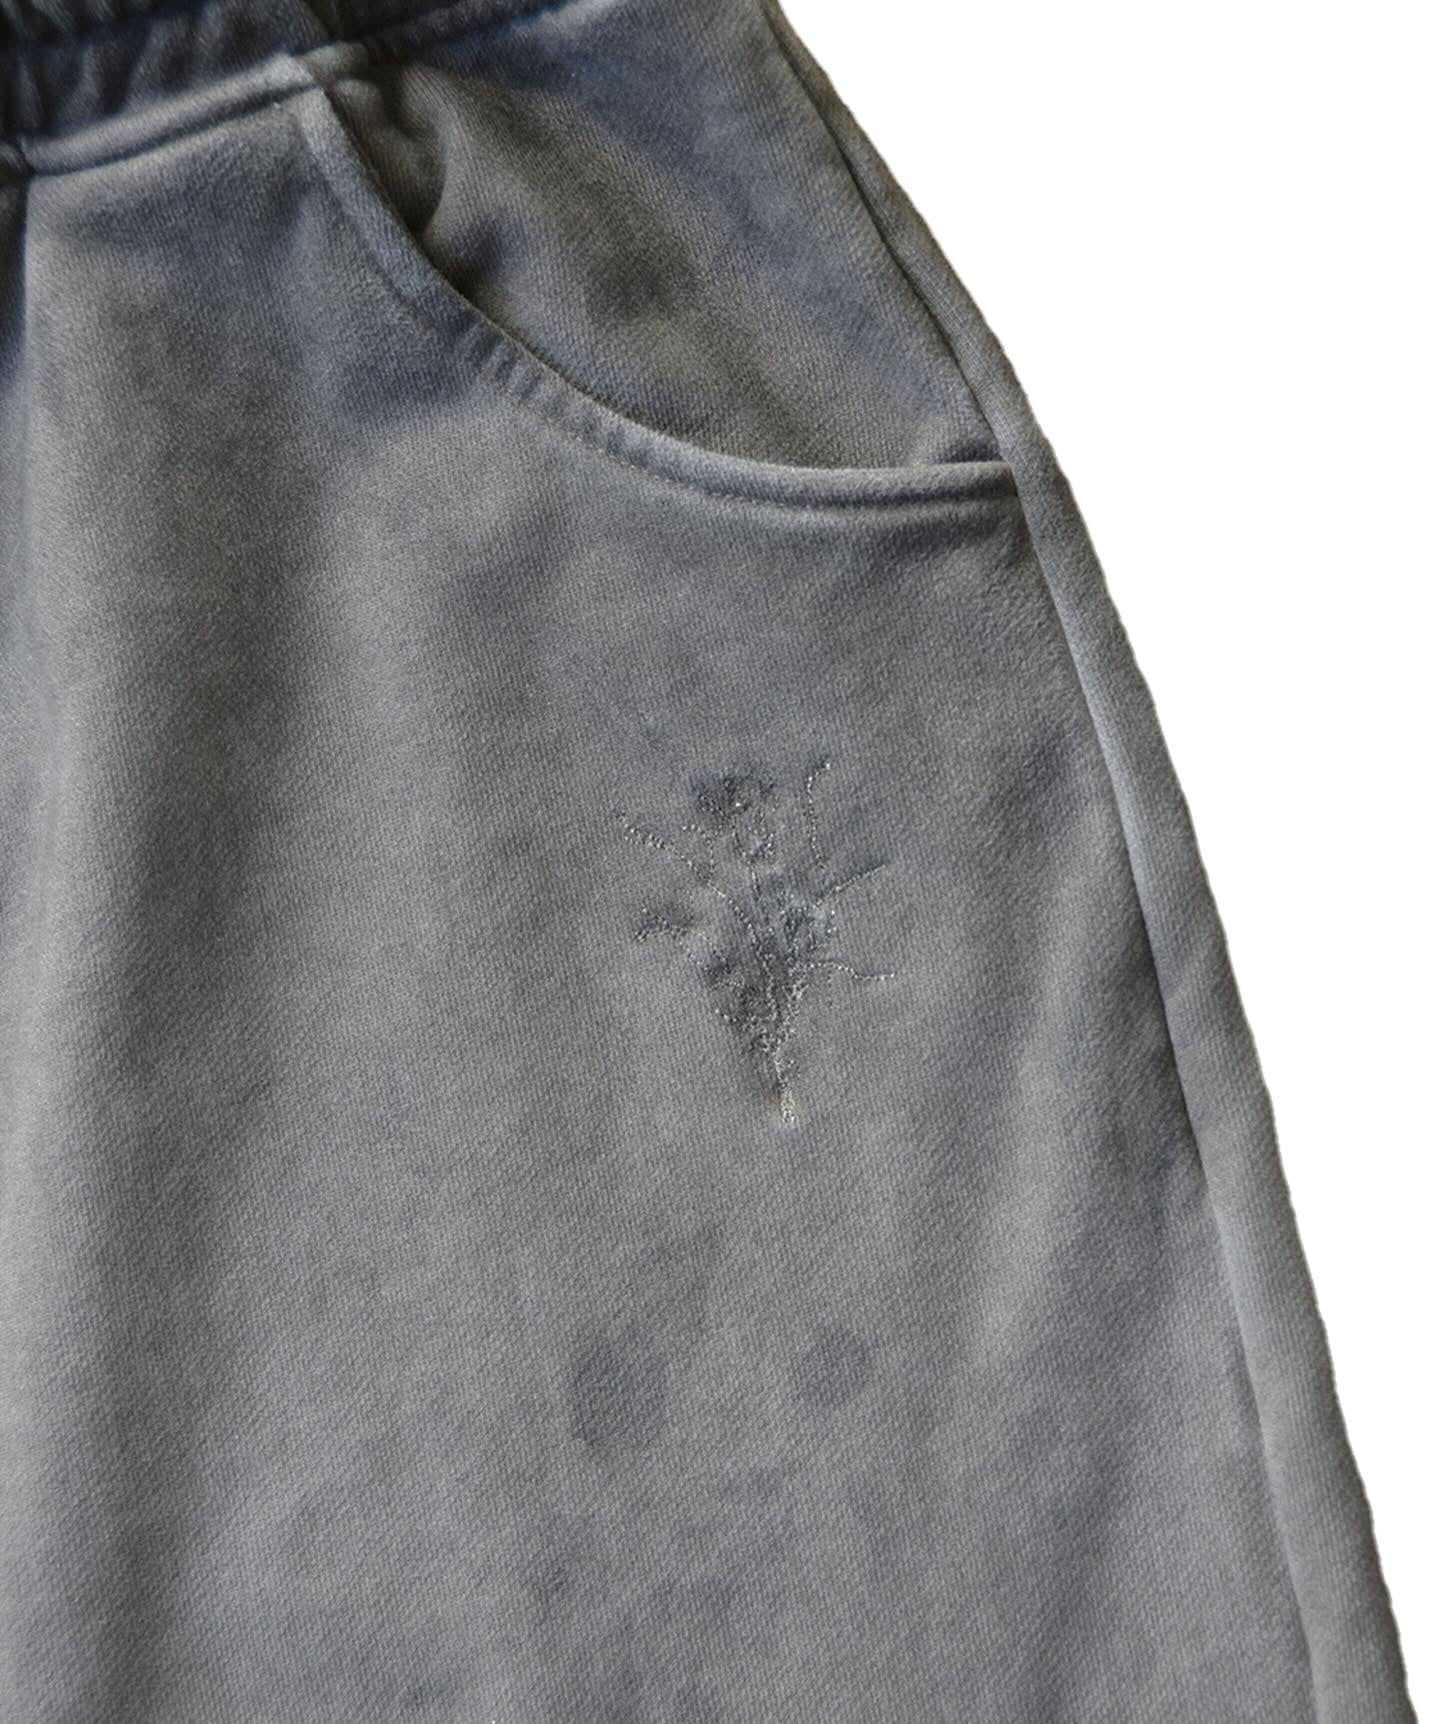 IRON GREY STAINED BAGGY SWEATPANTS